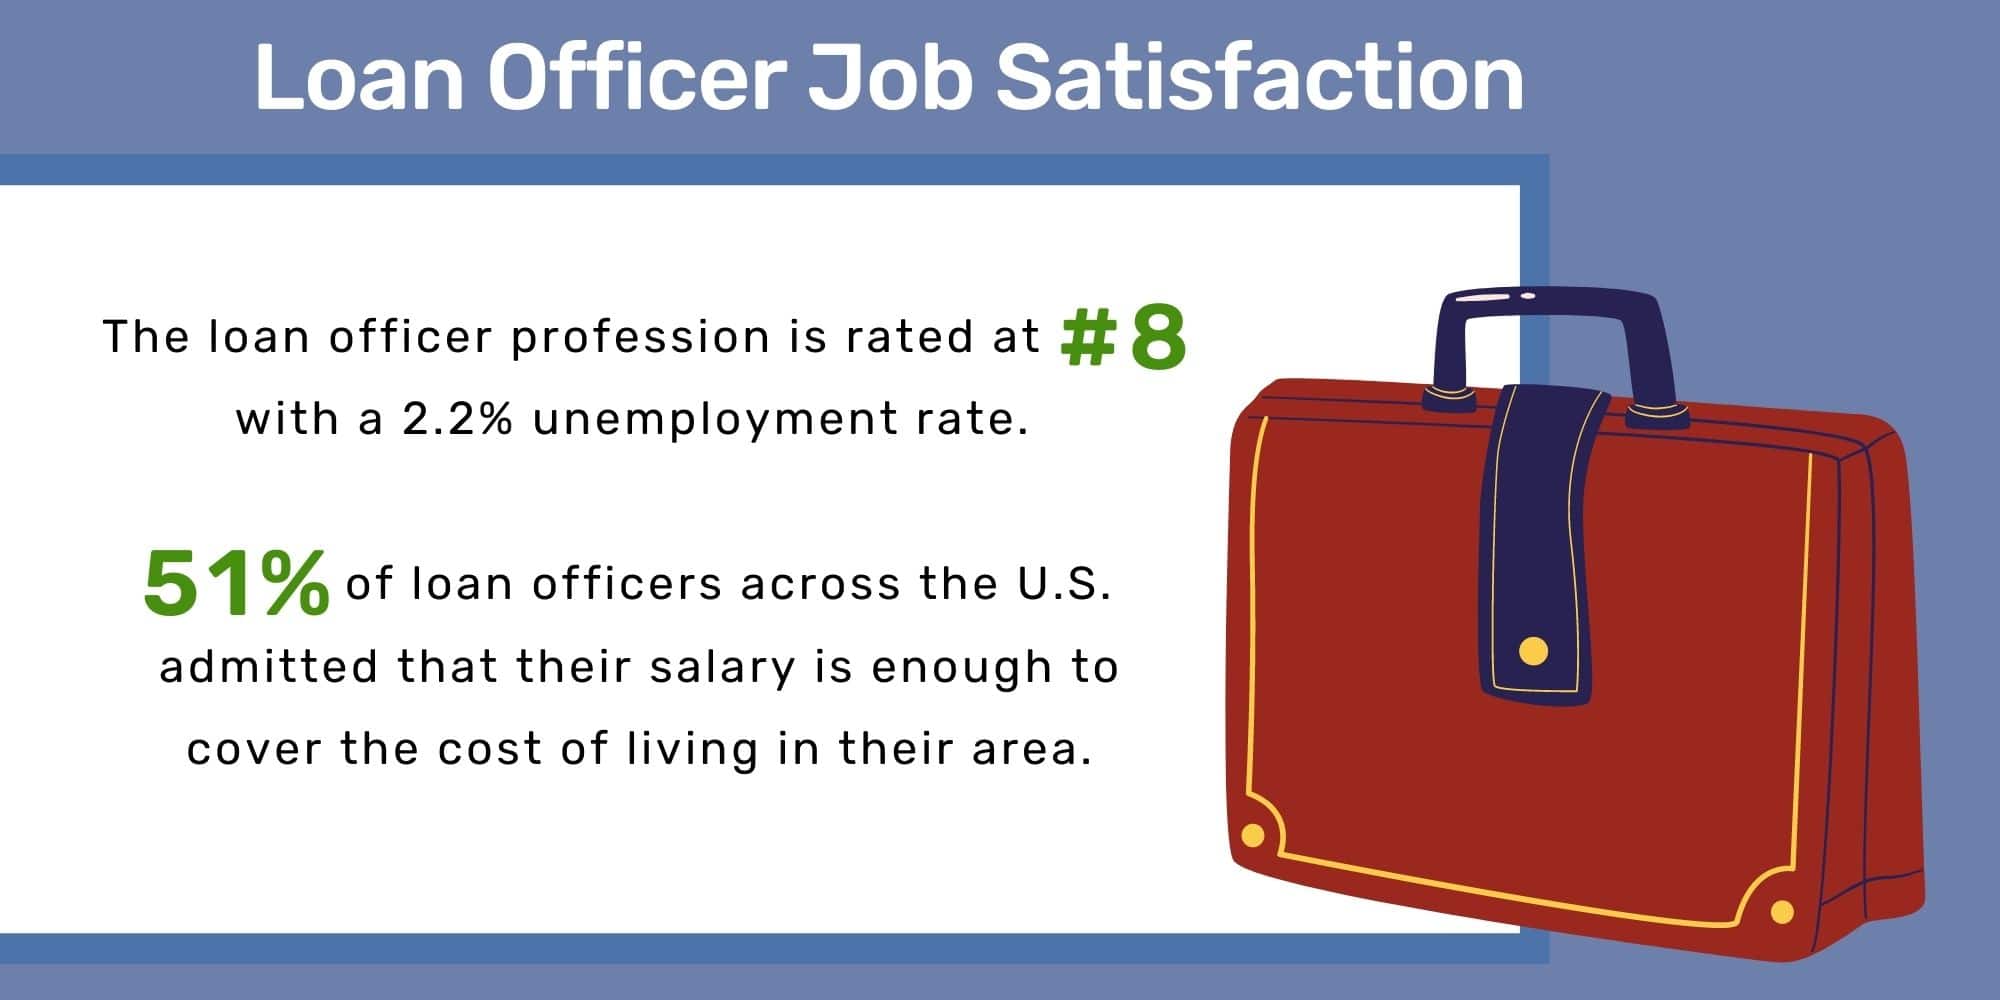 Mortgage Loan Officer Job Satisfaction in Texas